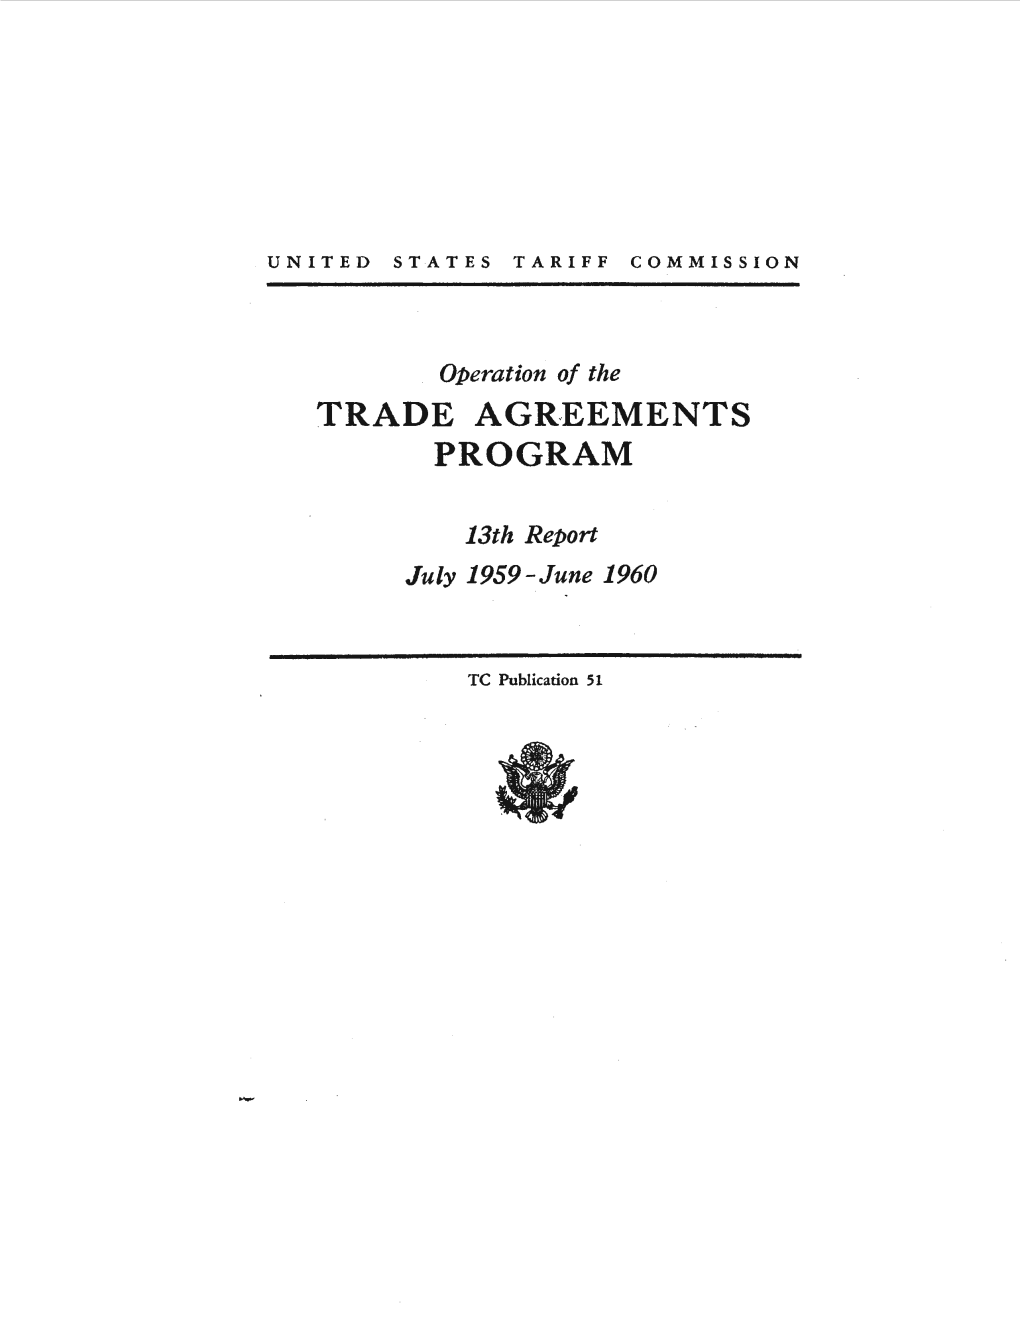 Operation of the Trade Agreements Program, 13Th Report, July 1959